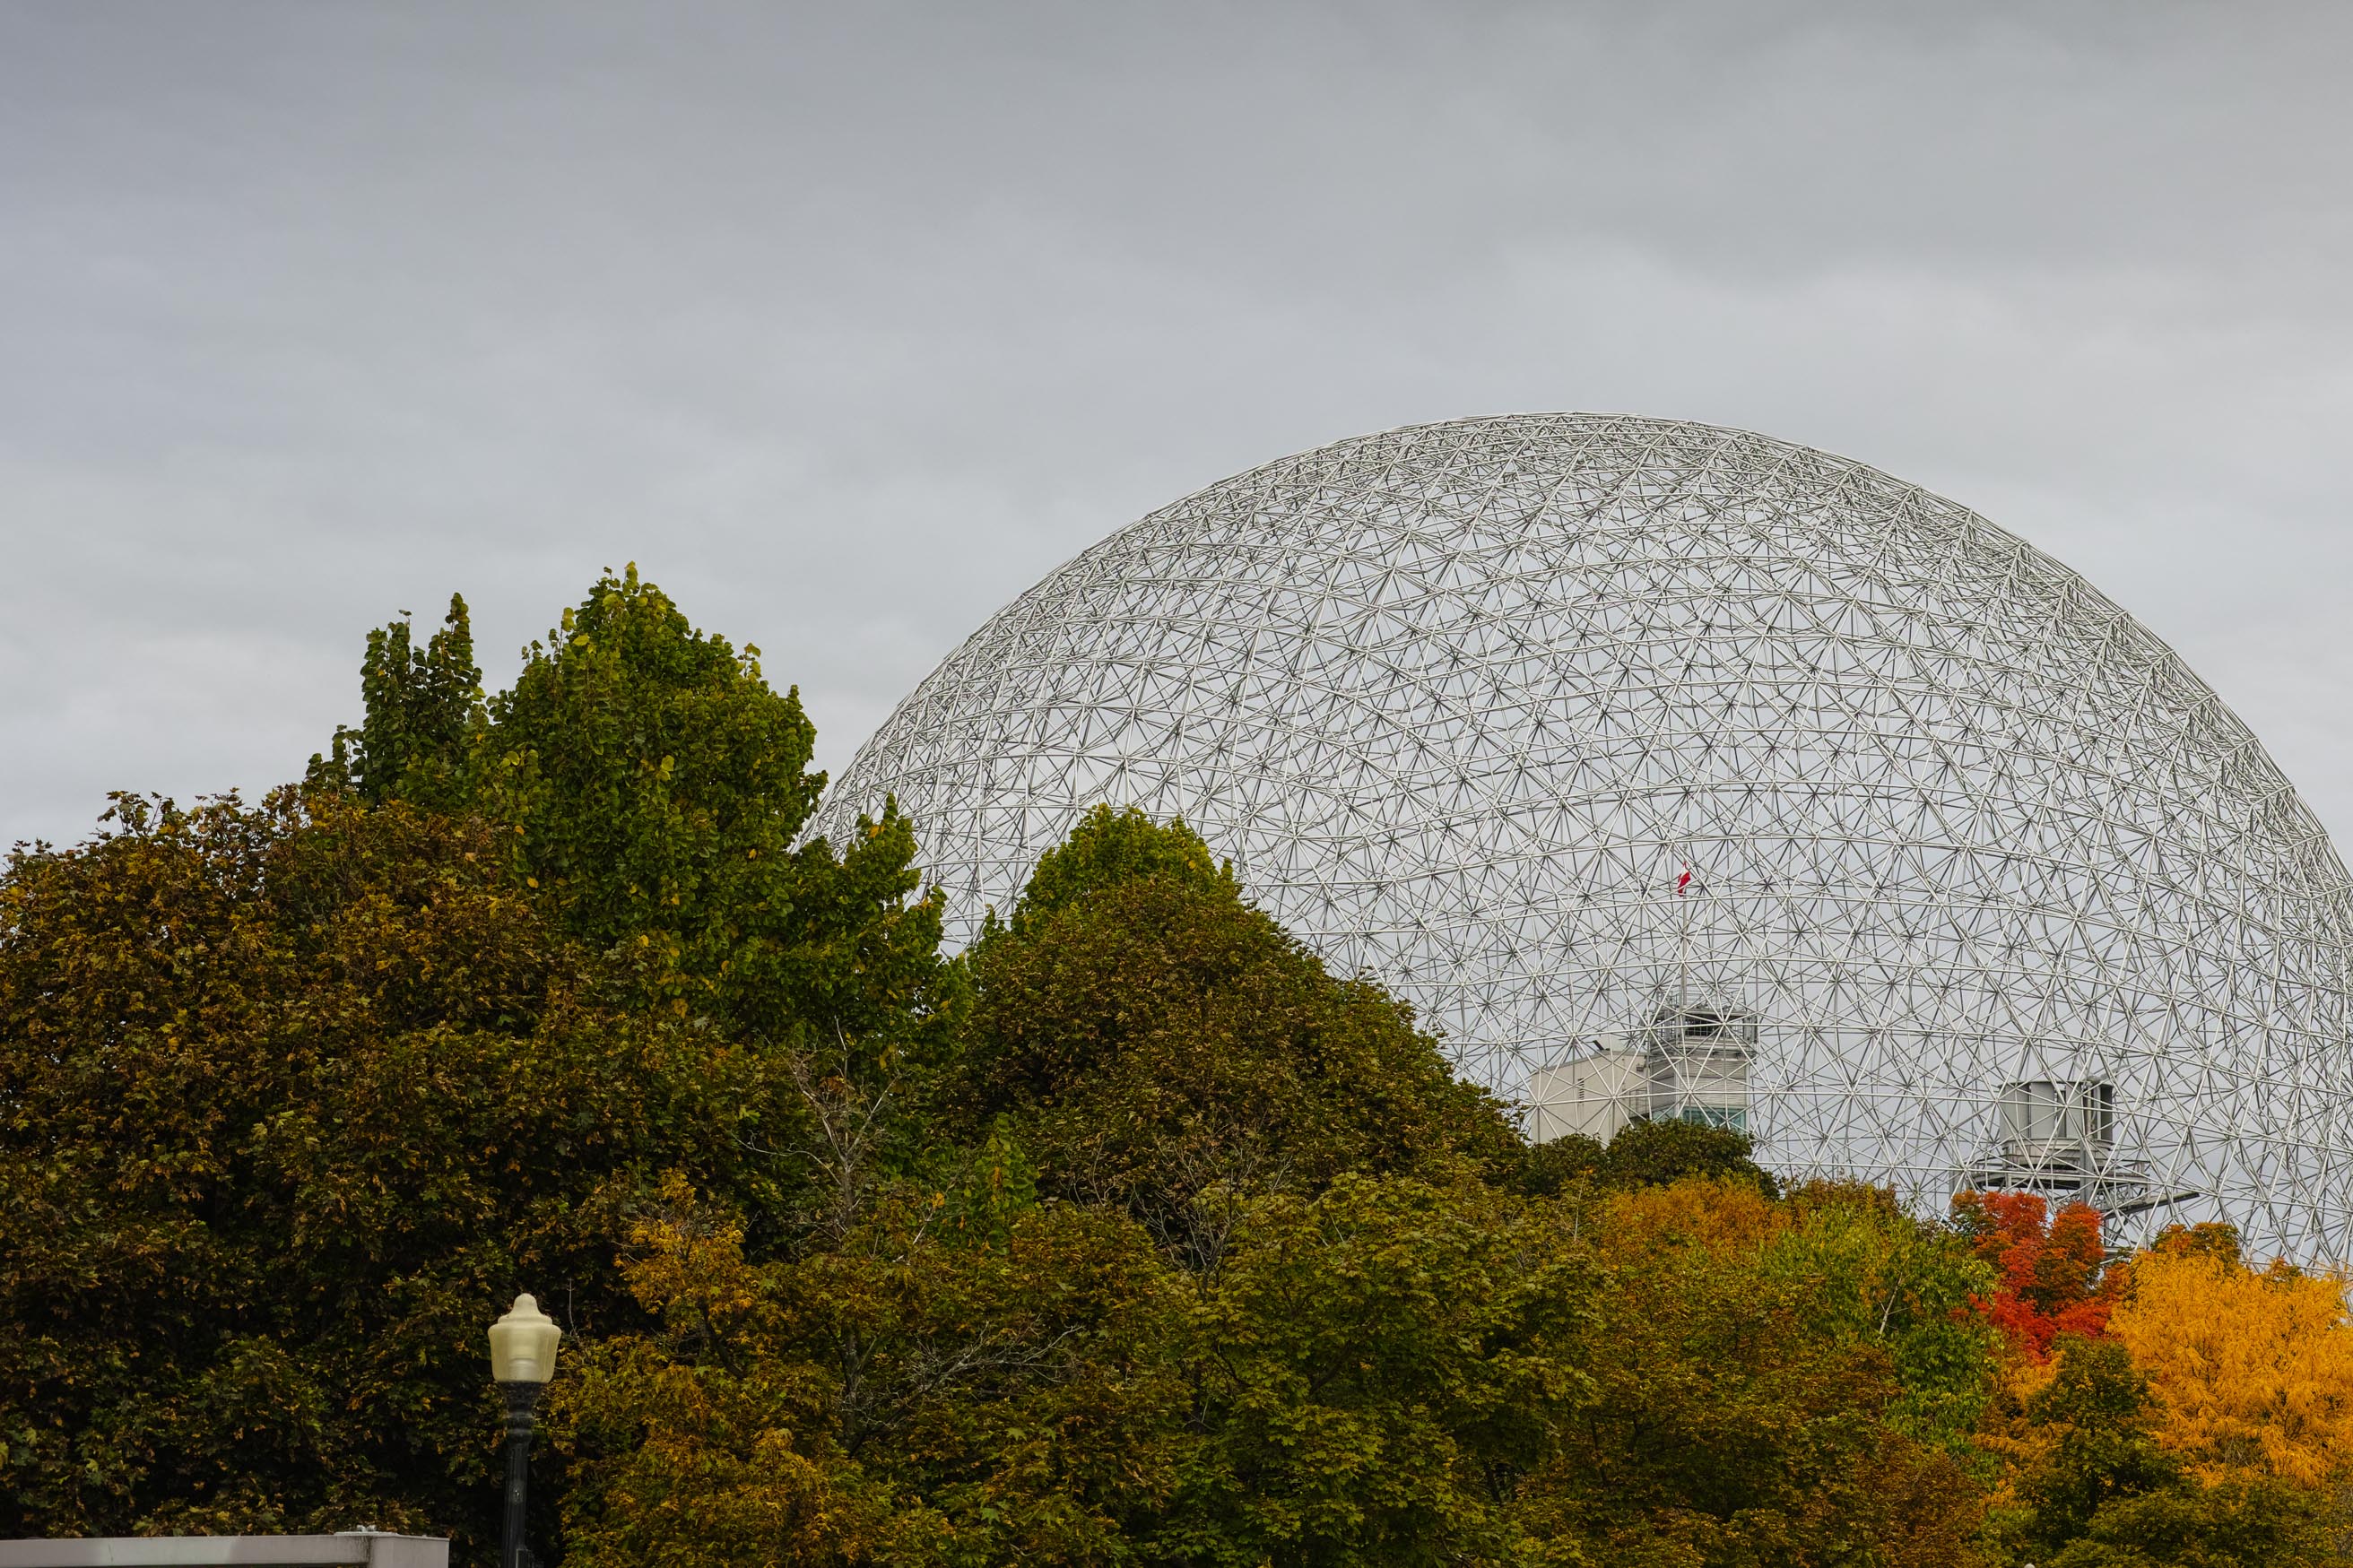 The geodesic dome is located in the Jean-Drapeau Park on the Île Sainte-Hélène and can be seen from afar thanks to its height of 62 metres. 